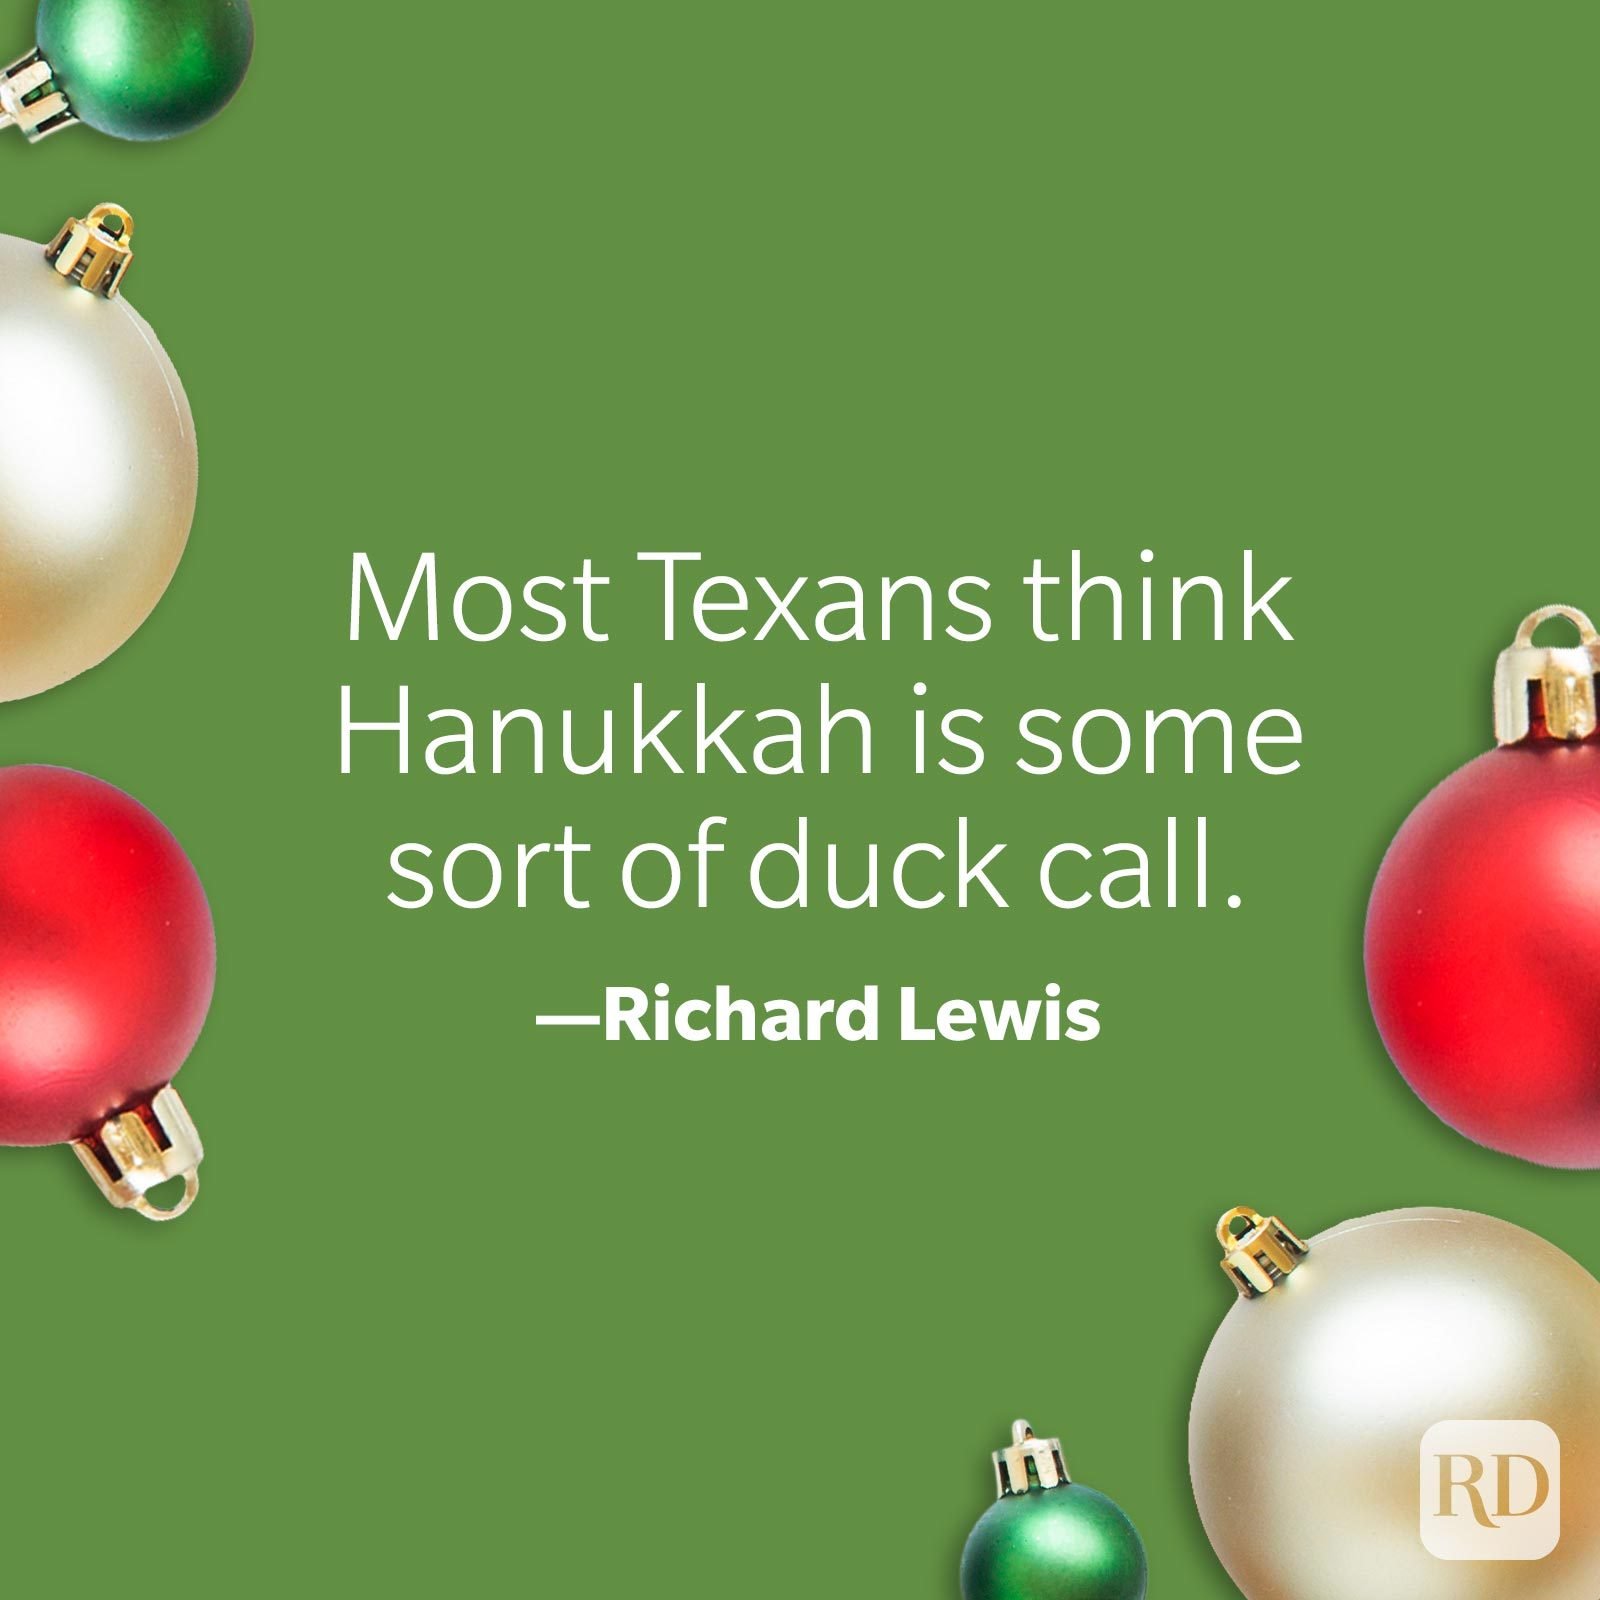 55 Funny Christmas Quotes to Share [2022]  Reader's Digest